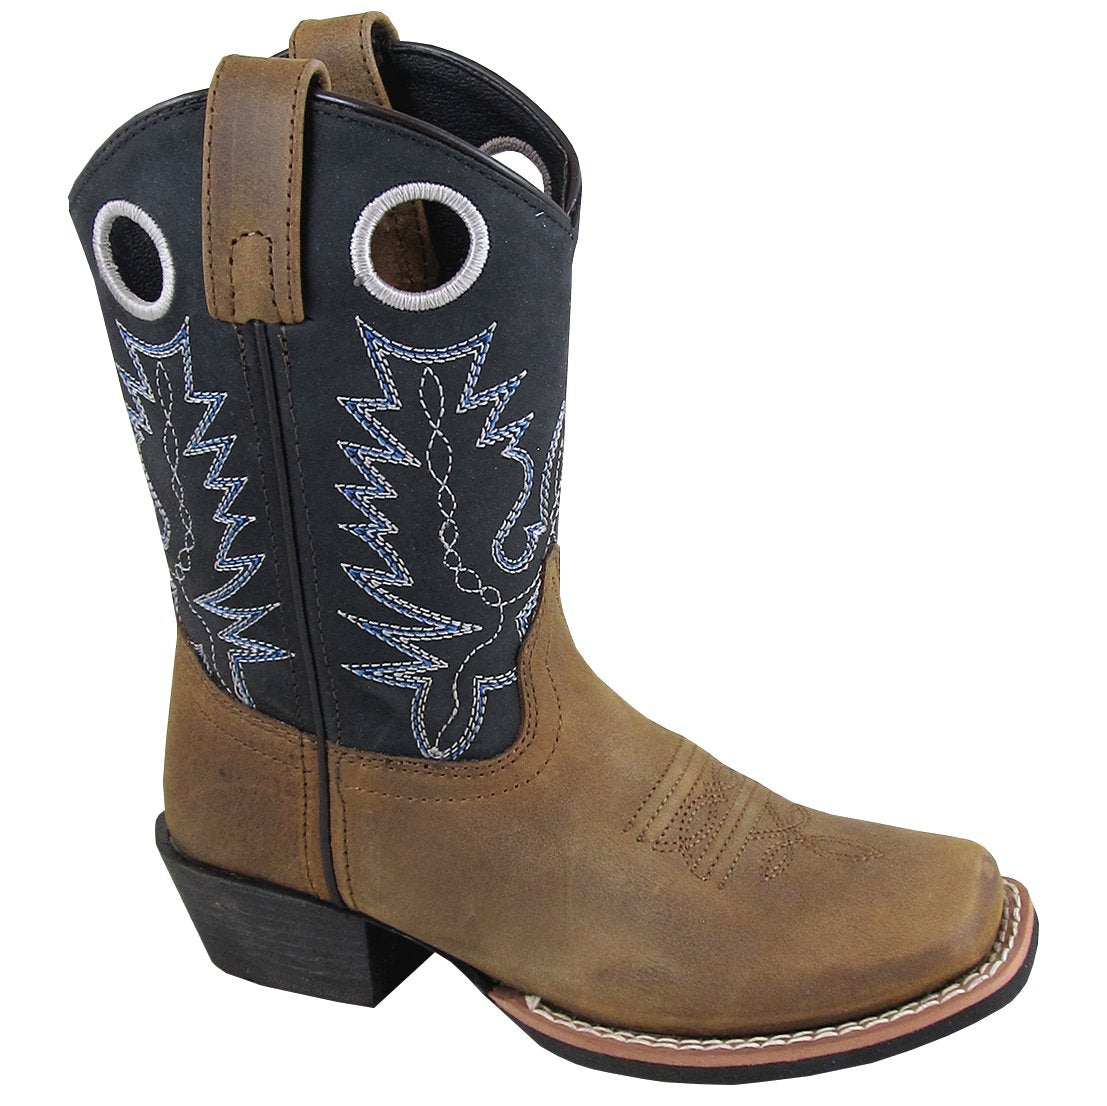 Smoky Mountain Youth Brown Distress/Black Square Toe Boot